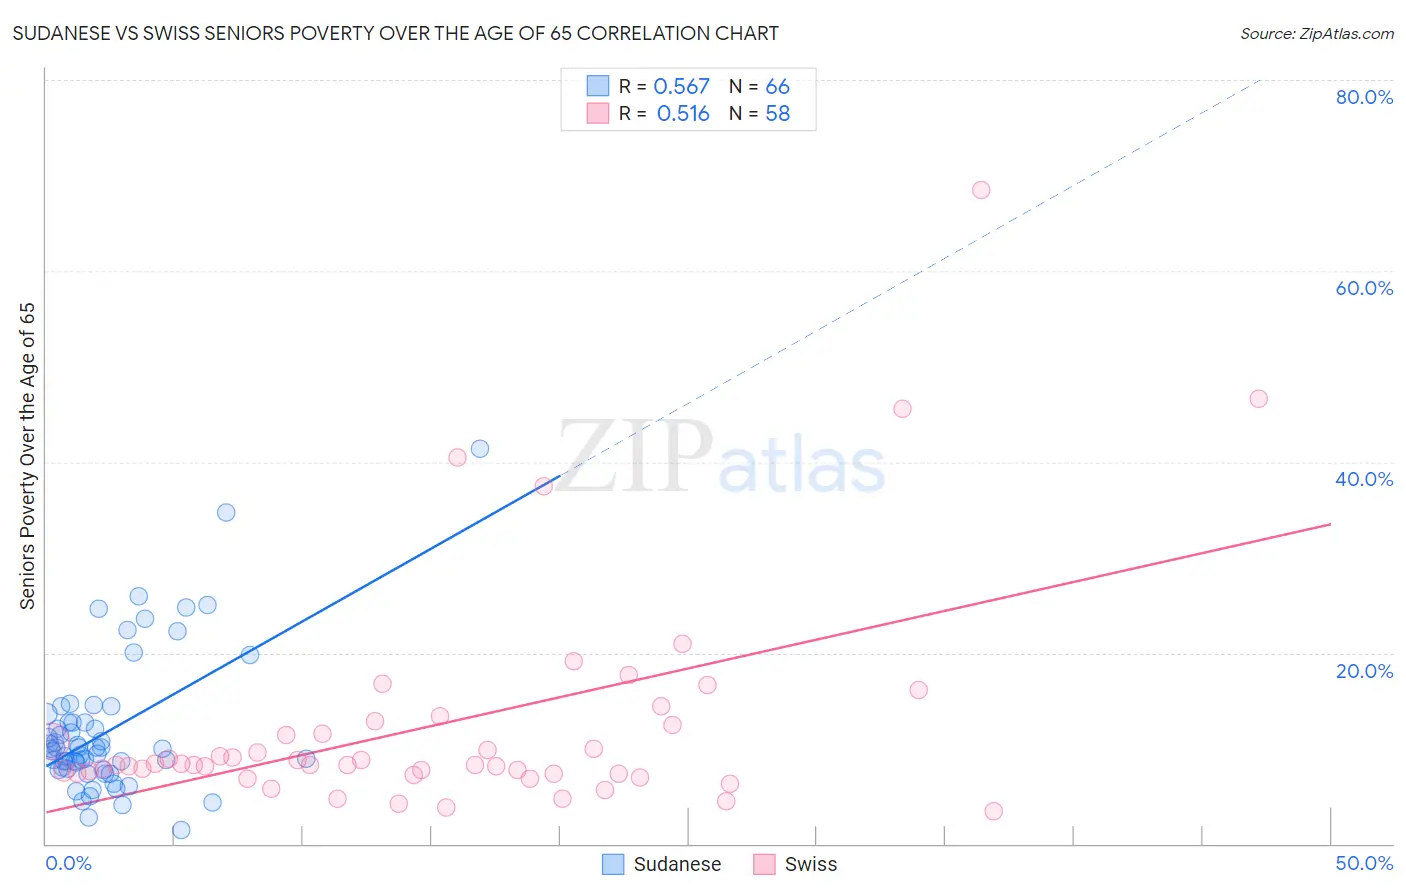 Sudanese vs Swiss Seniors Poverty Over the Age of 65